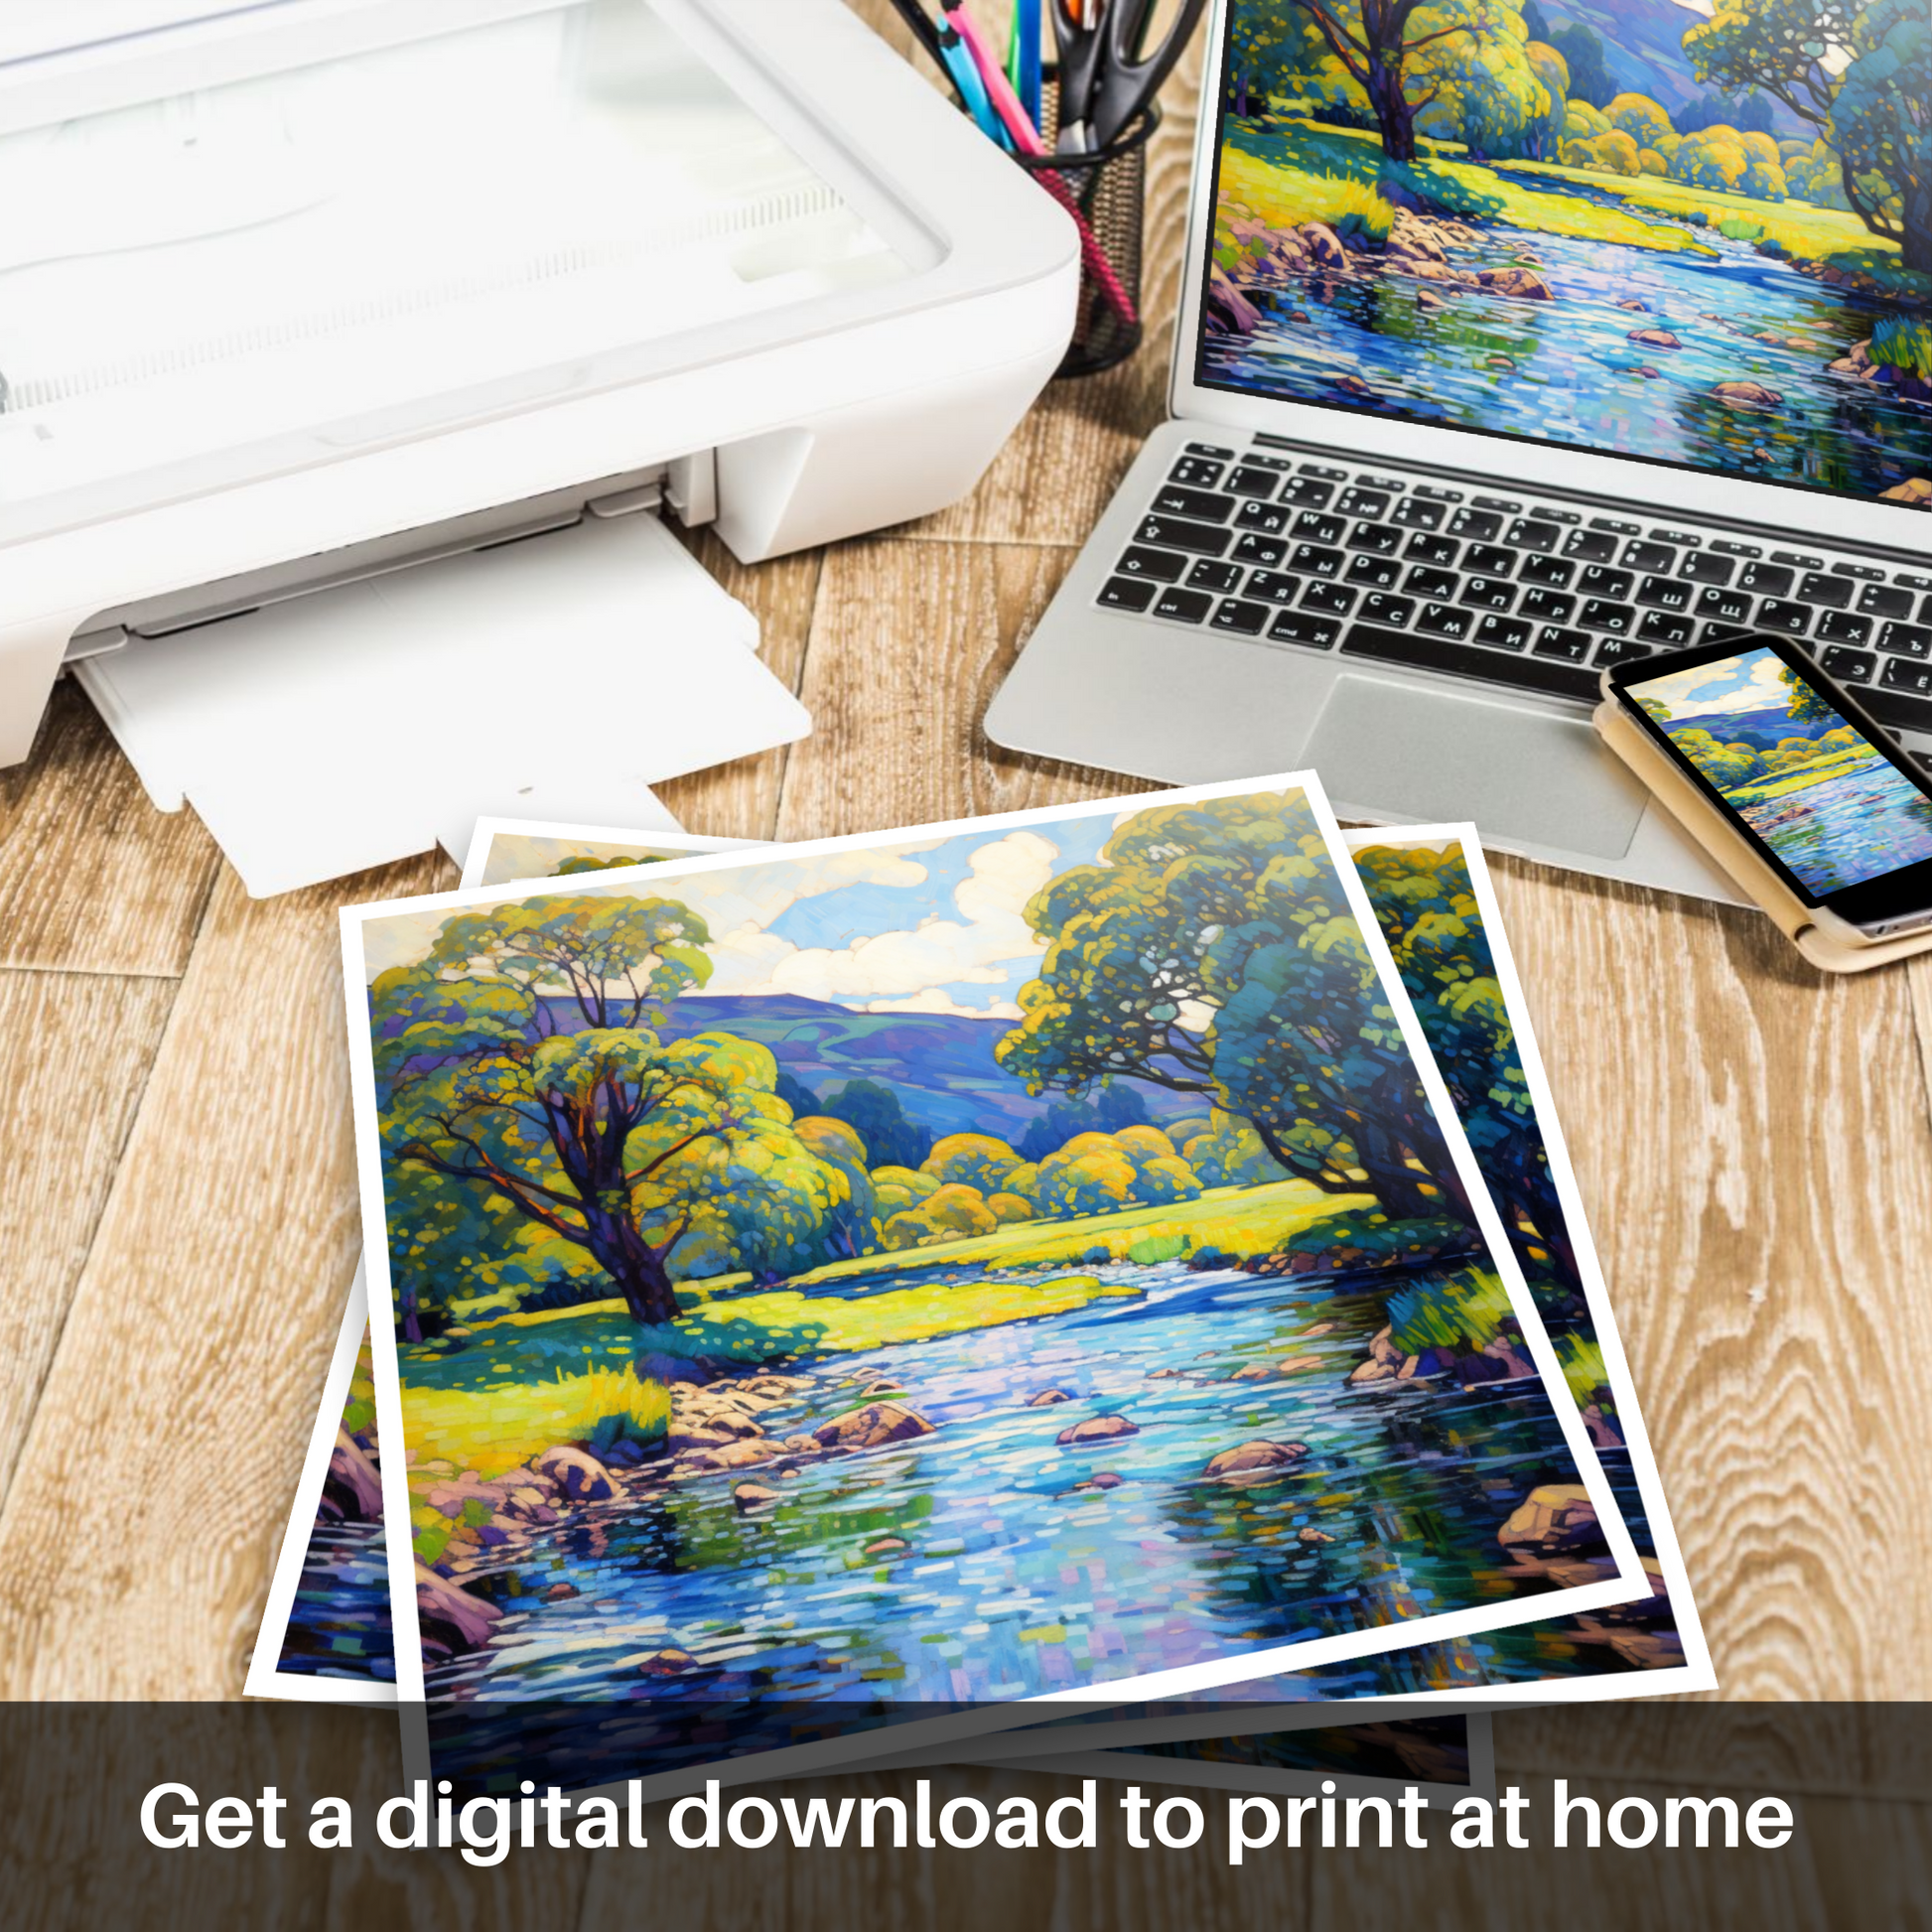 Downloadable and printable picture of River Earn, Perthshire in summer